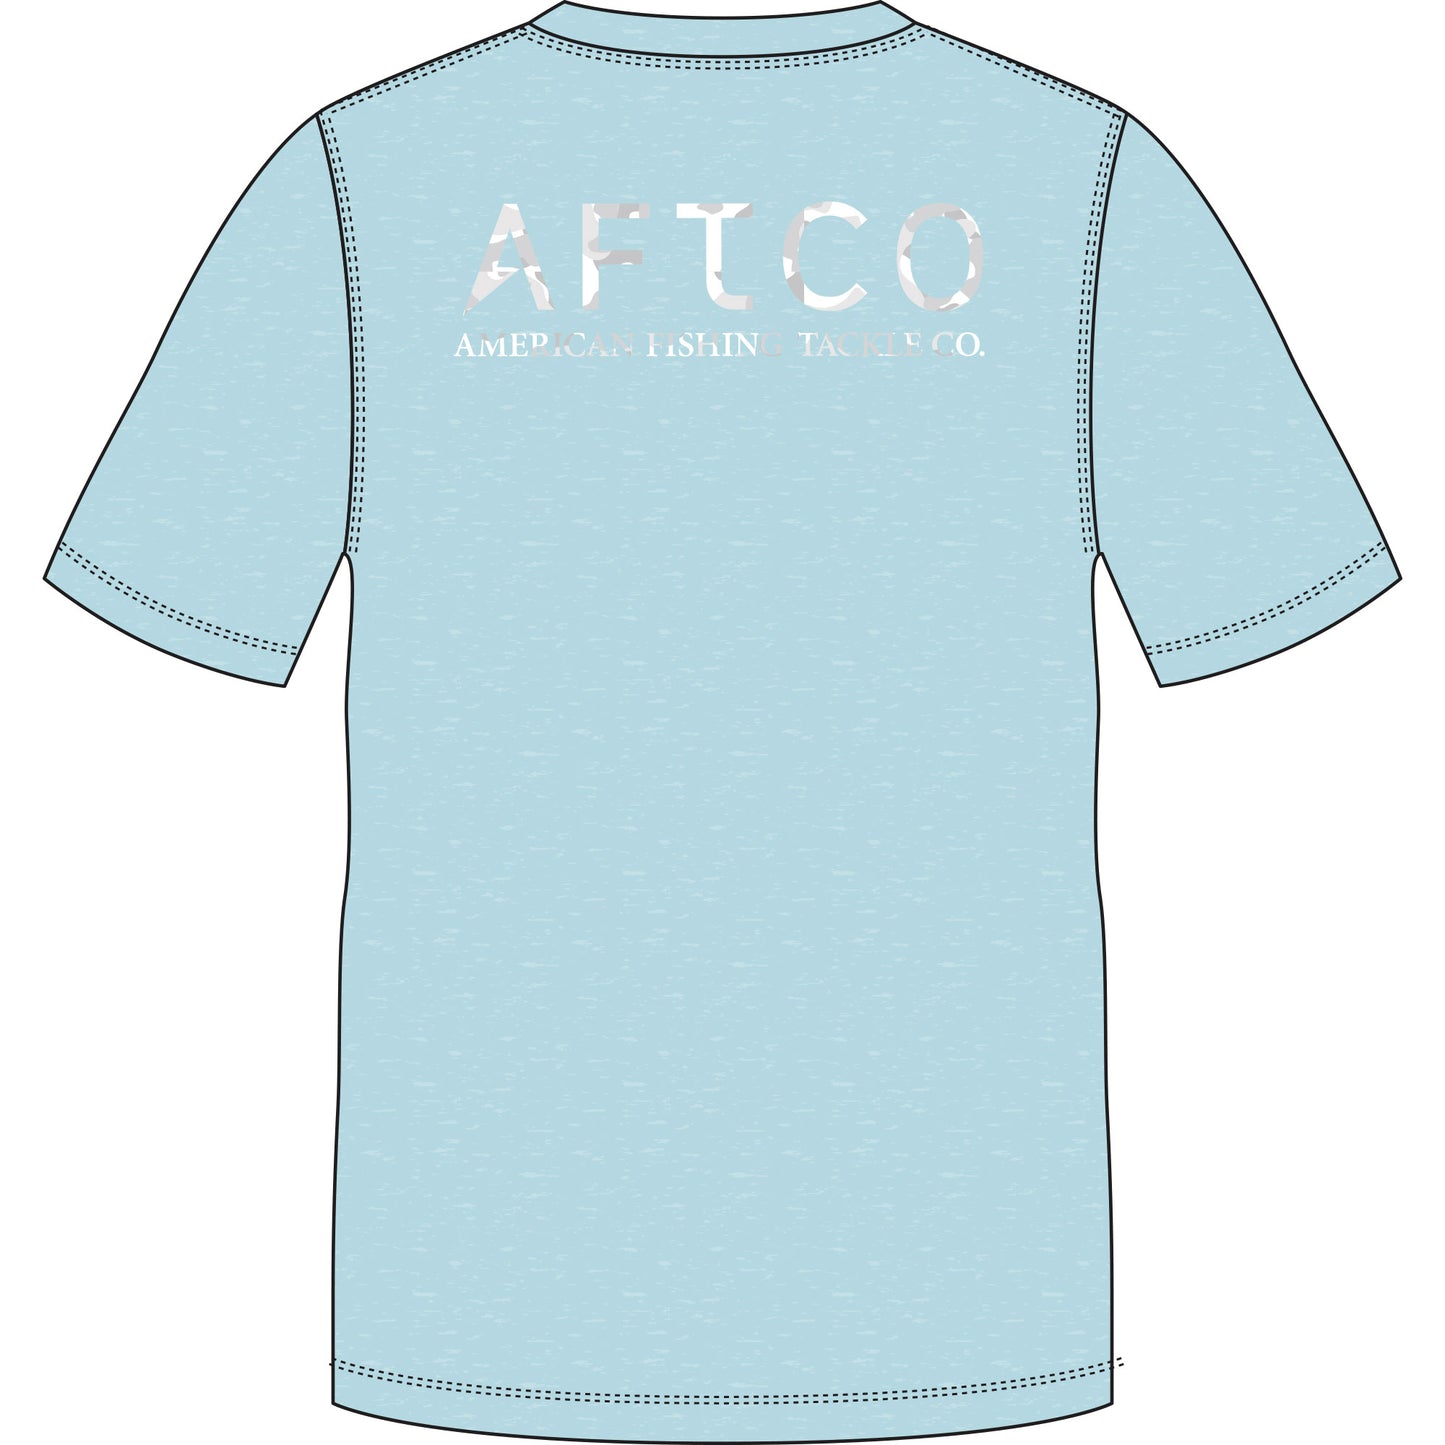 Aftco Samurai S/S Performance Shirt - Clearwater Heather